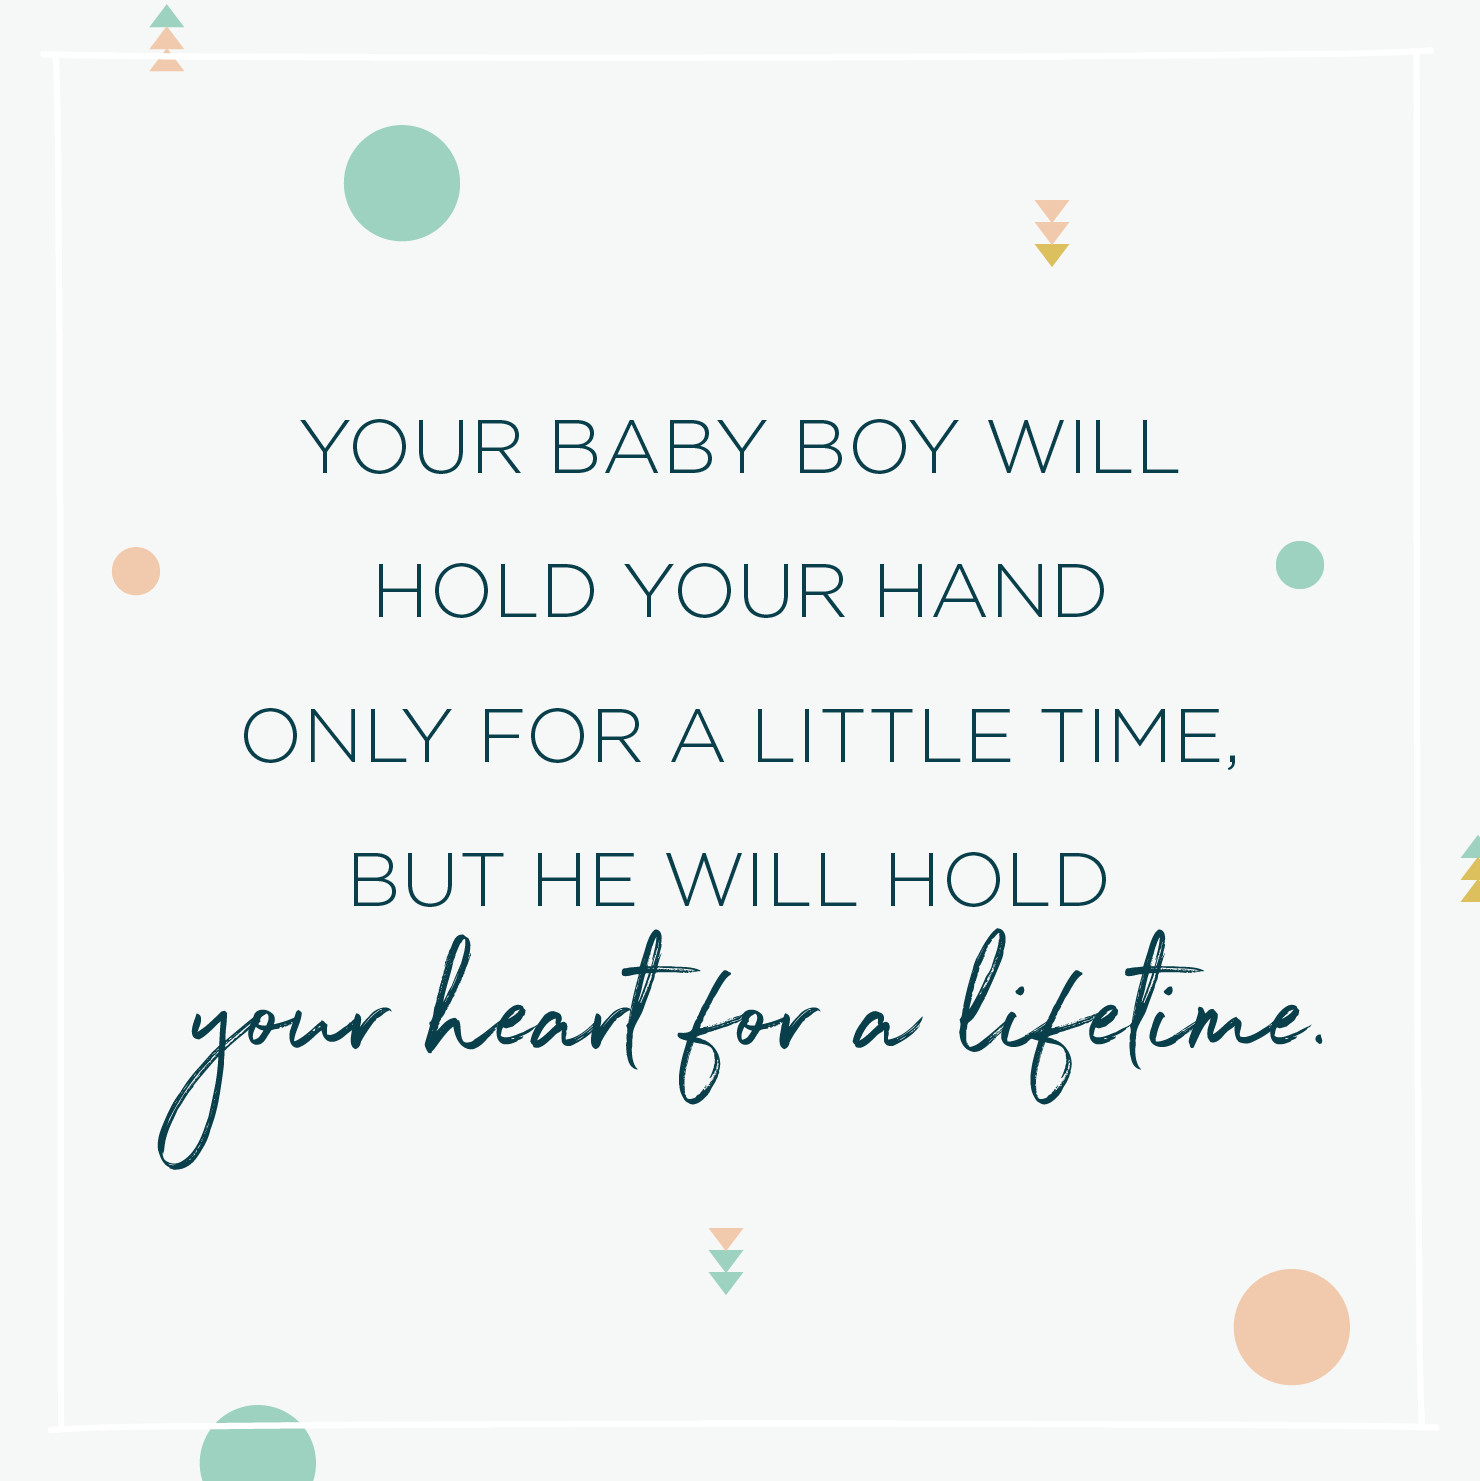 Quotes For Your Baby Boy
 84 Inspirational Baby Quotes and Sayings